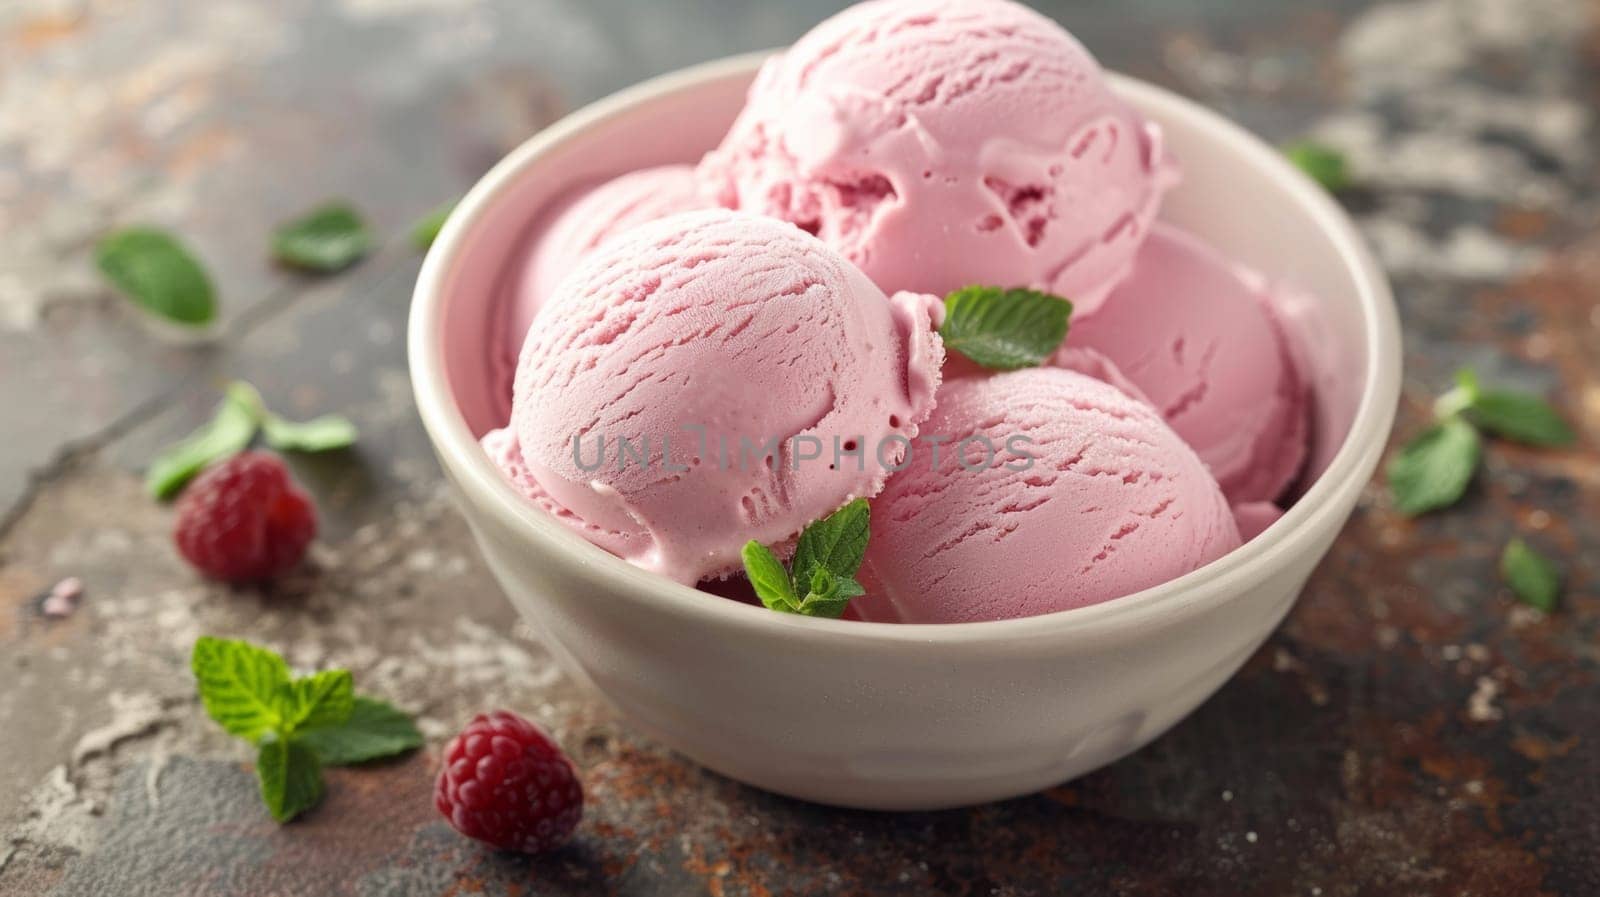 A bowl of ice cream with raspberries and mint leaves, AI by starush